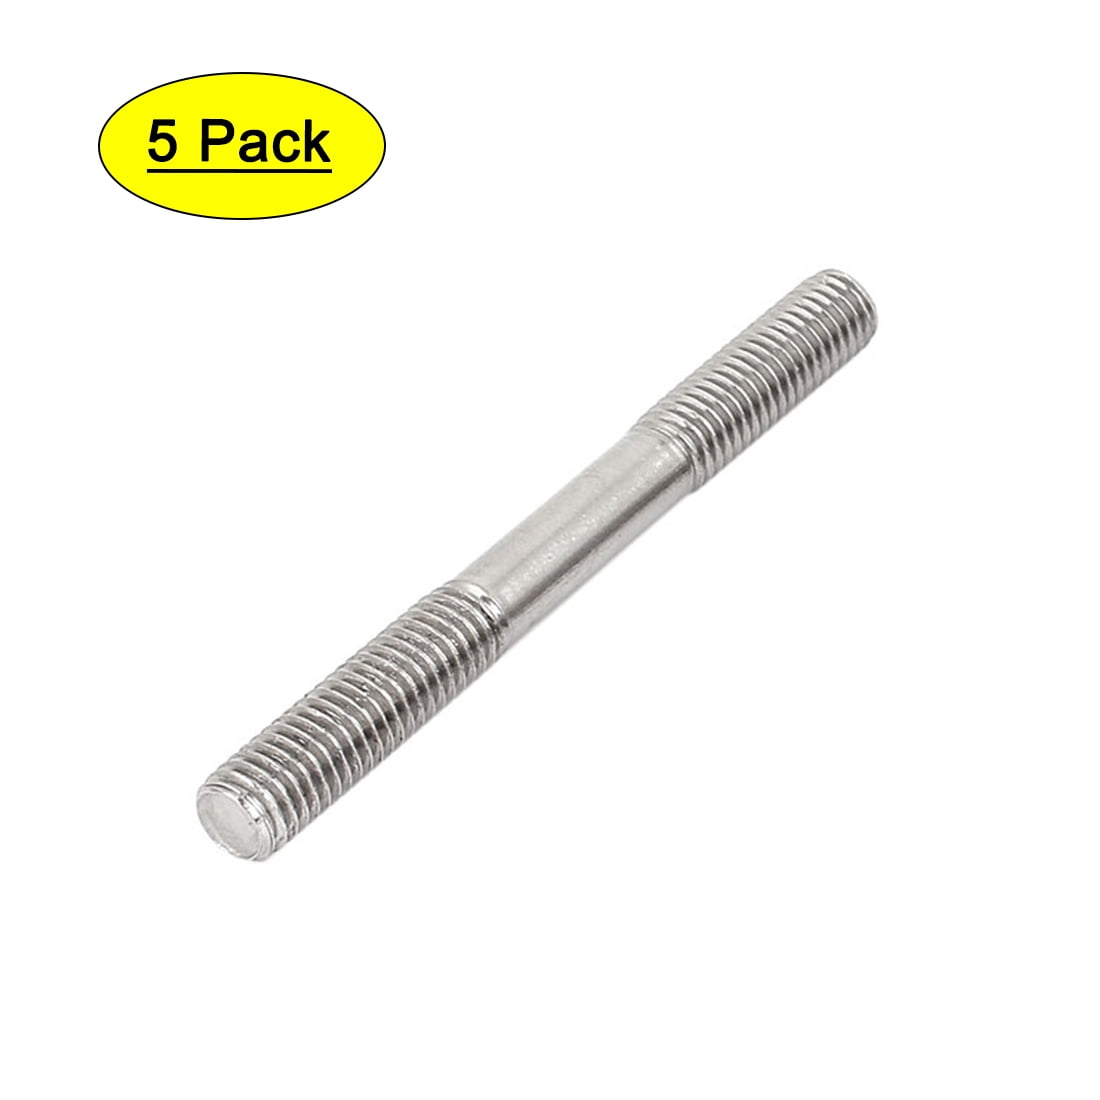 M8 40mm-150mm A4 316 Stainless Steel Double End Threaded Stud Bolts Screws Rod 